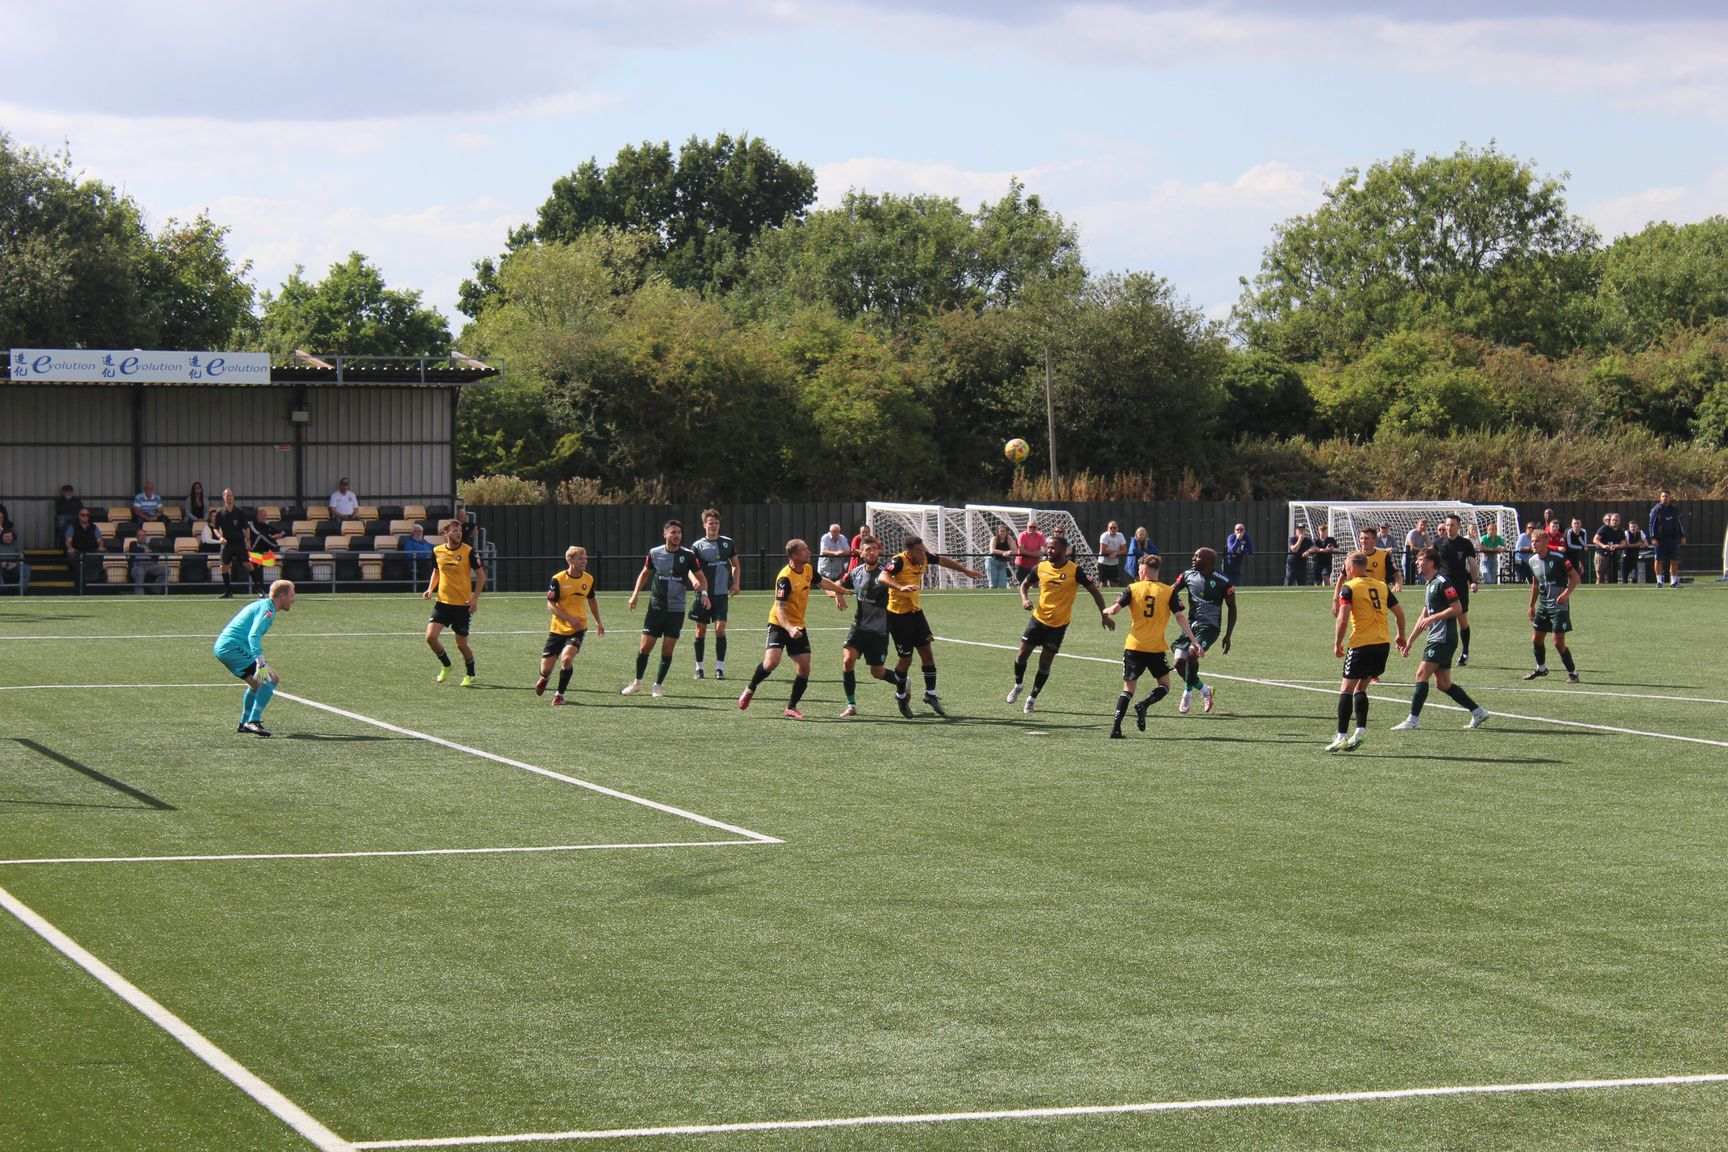 Match Action At Rushall